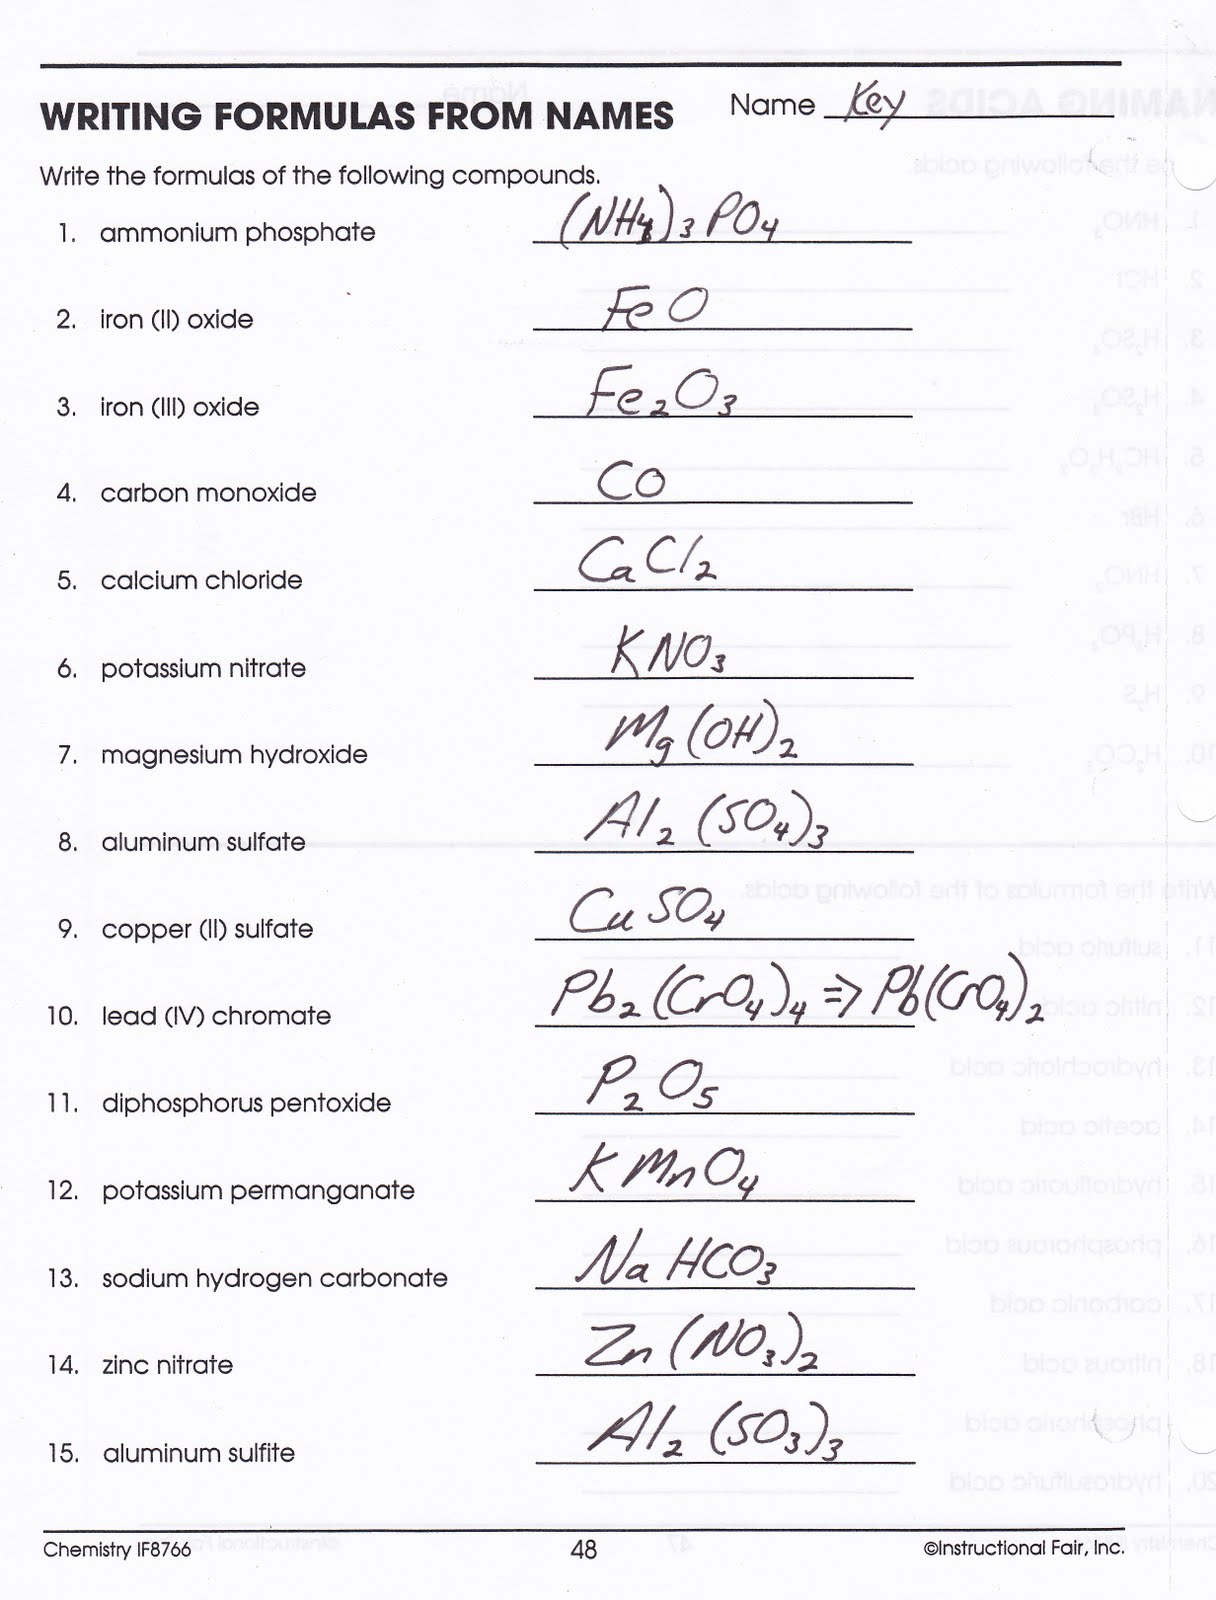 Compound Names And Formulas Worksheet Answers